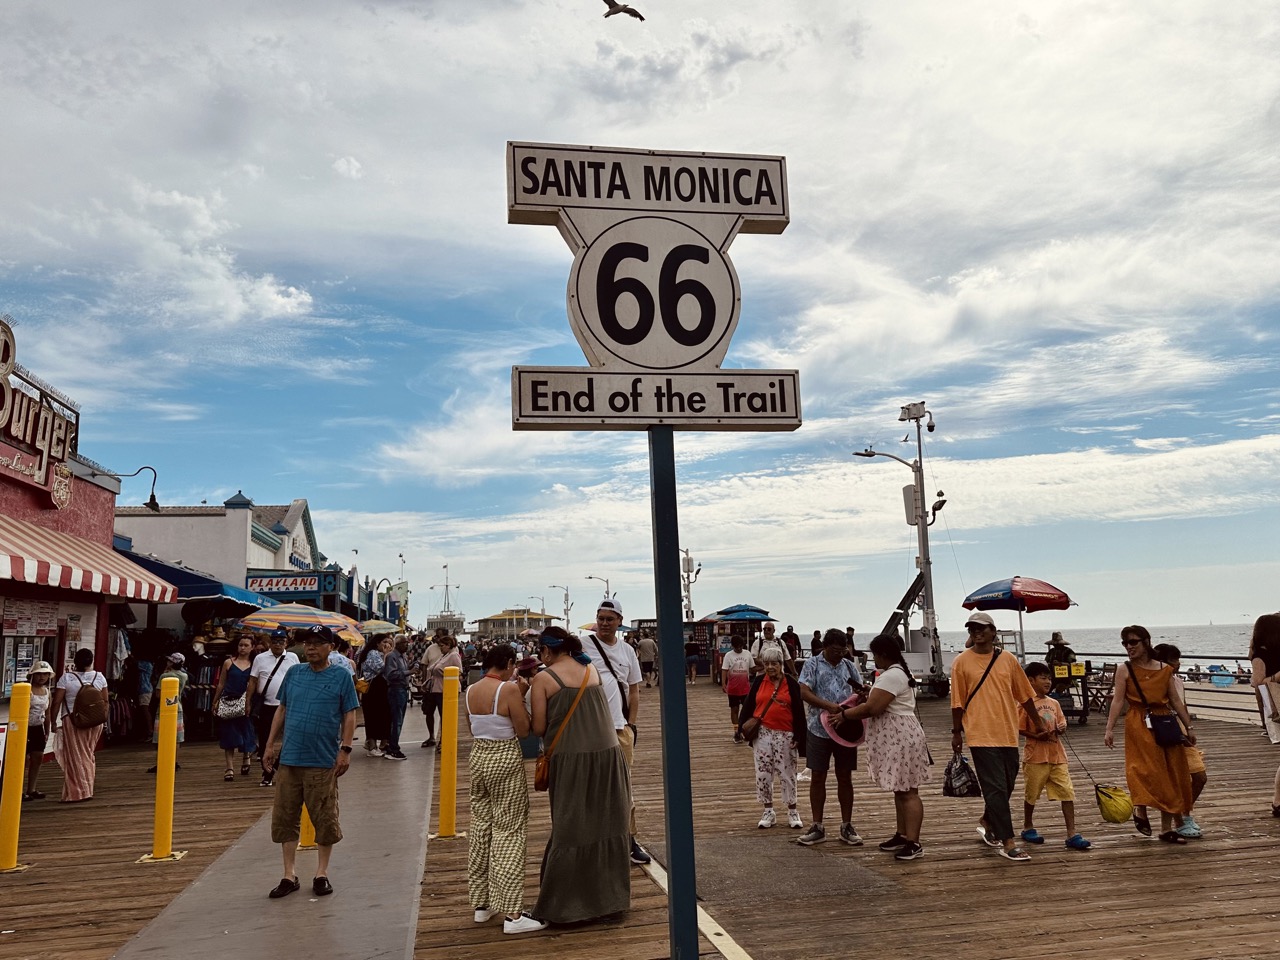 End of Route 66 is in Santa Monica